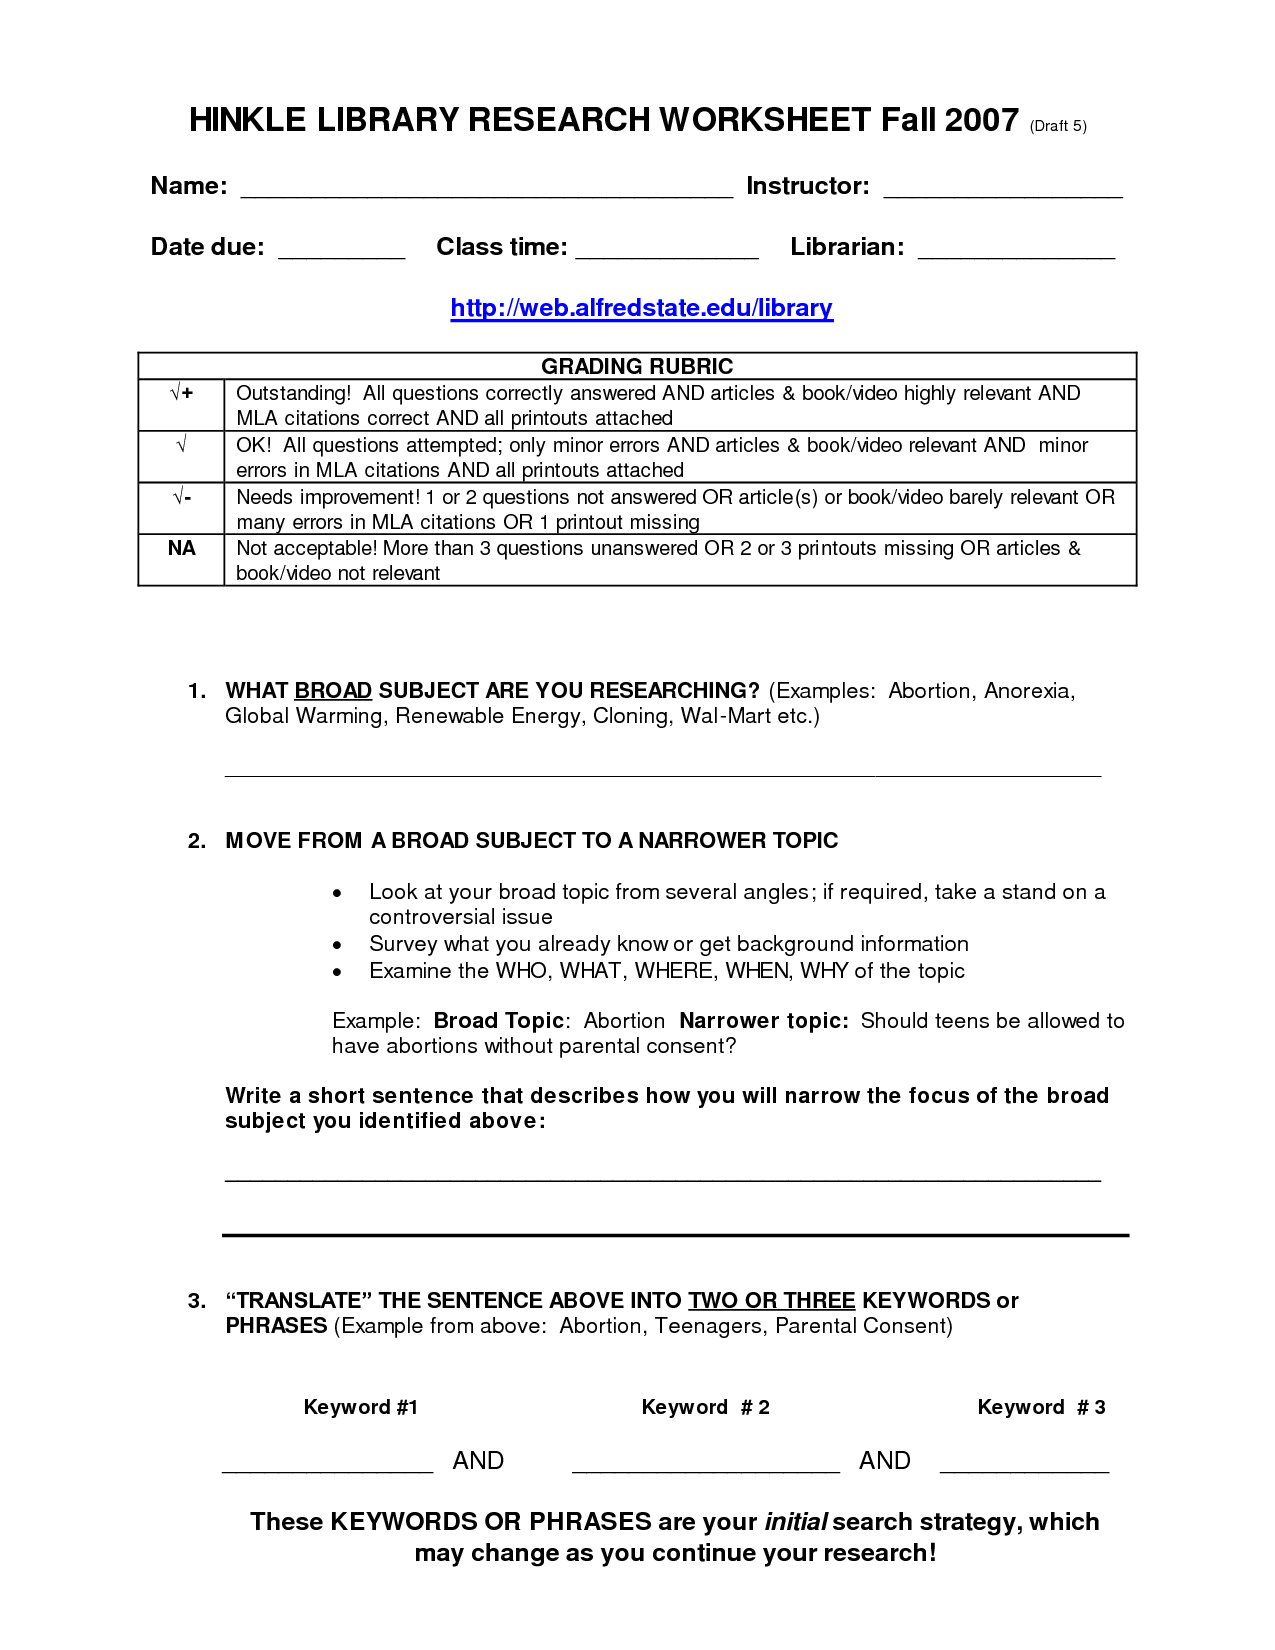 17-best-images-of-english-articles-worksheet-english-grammar